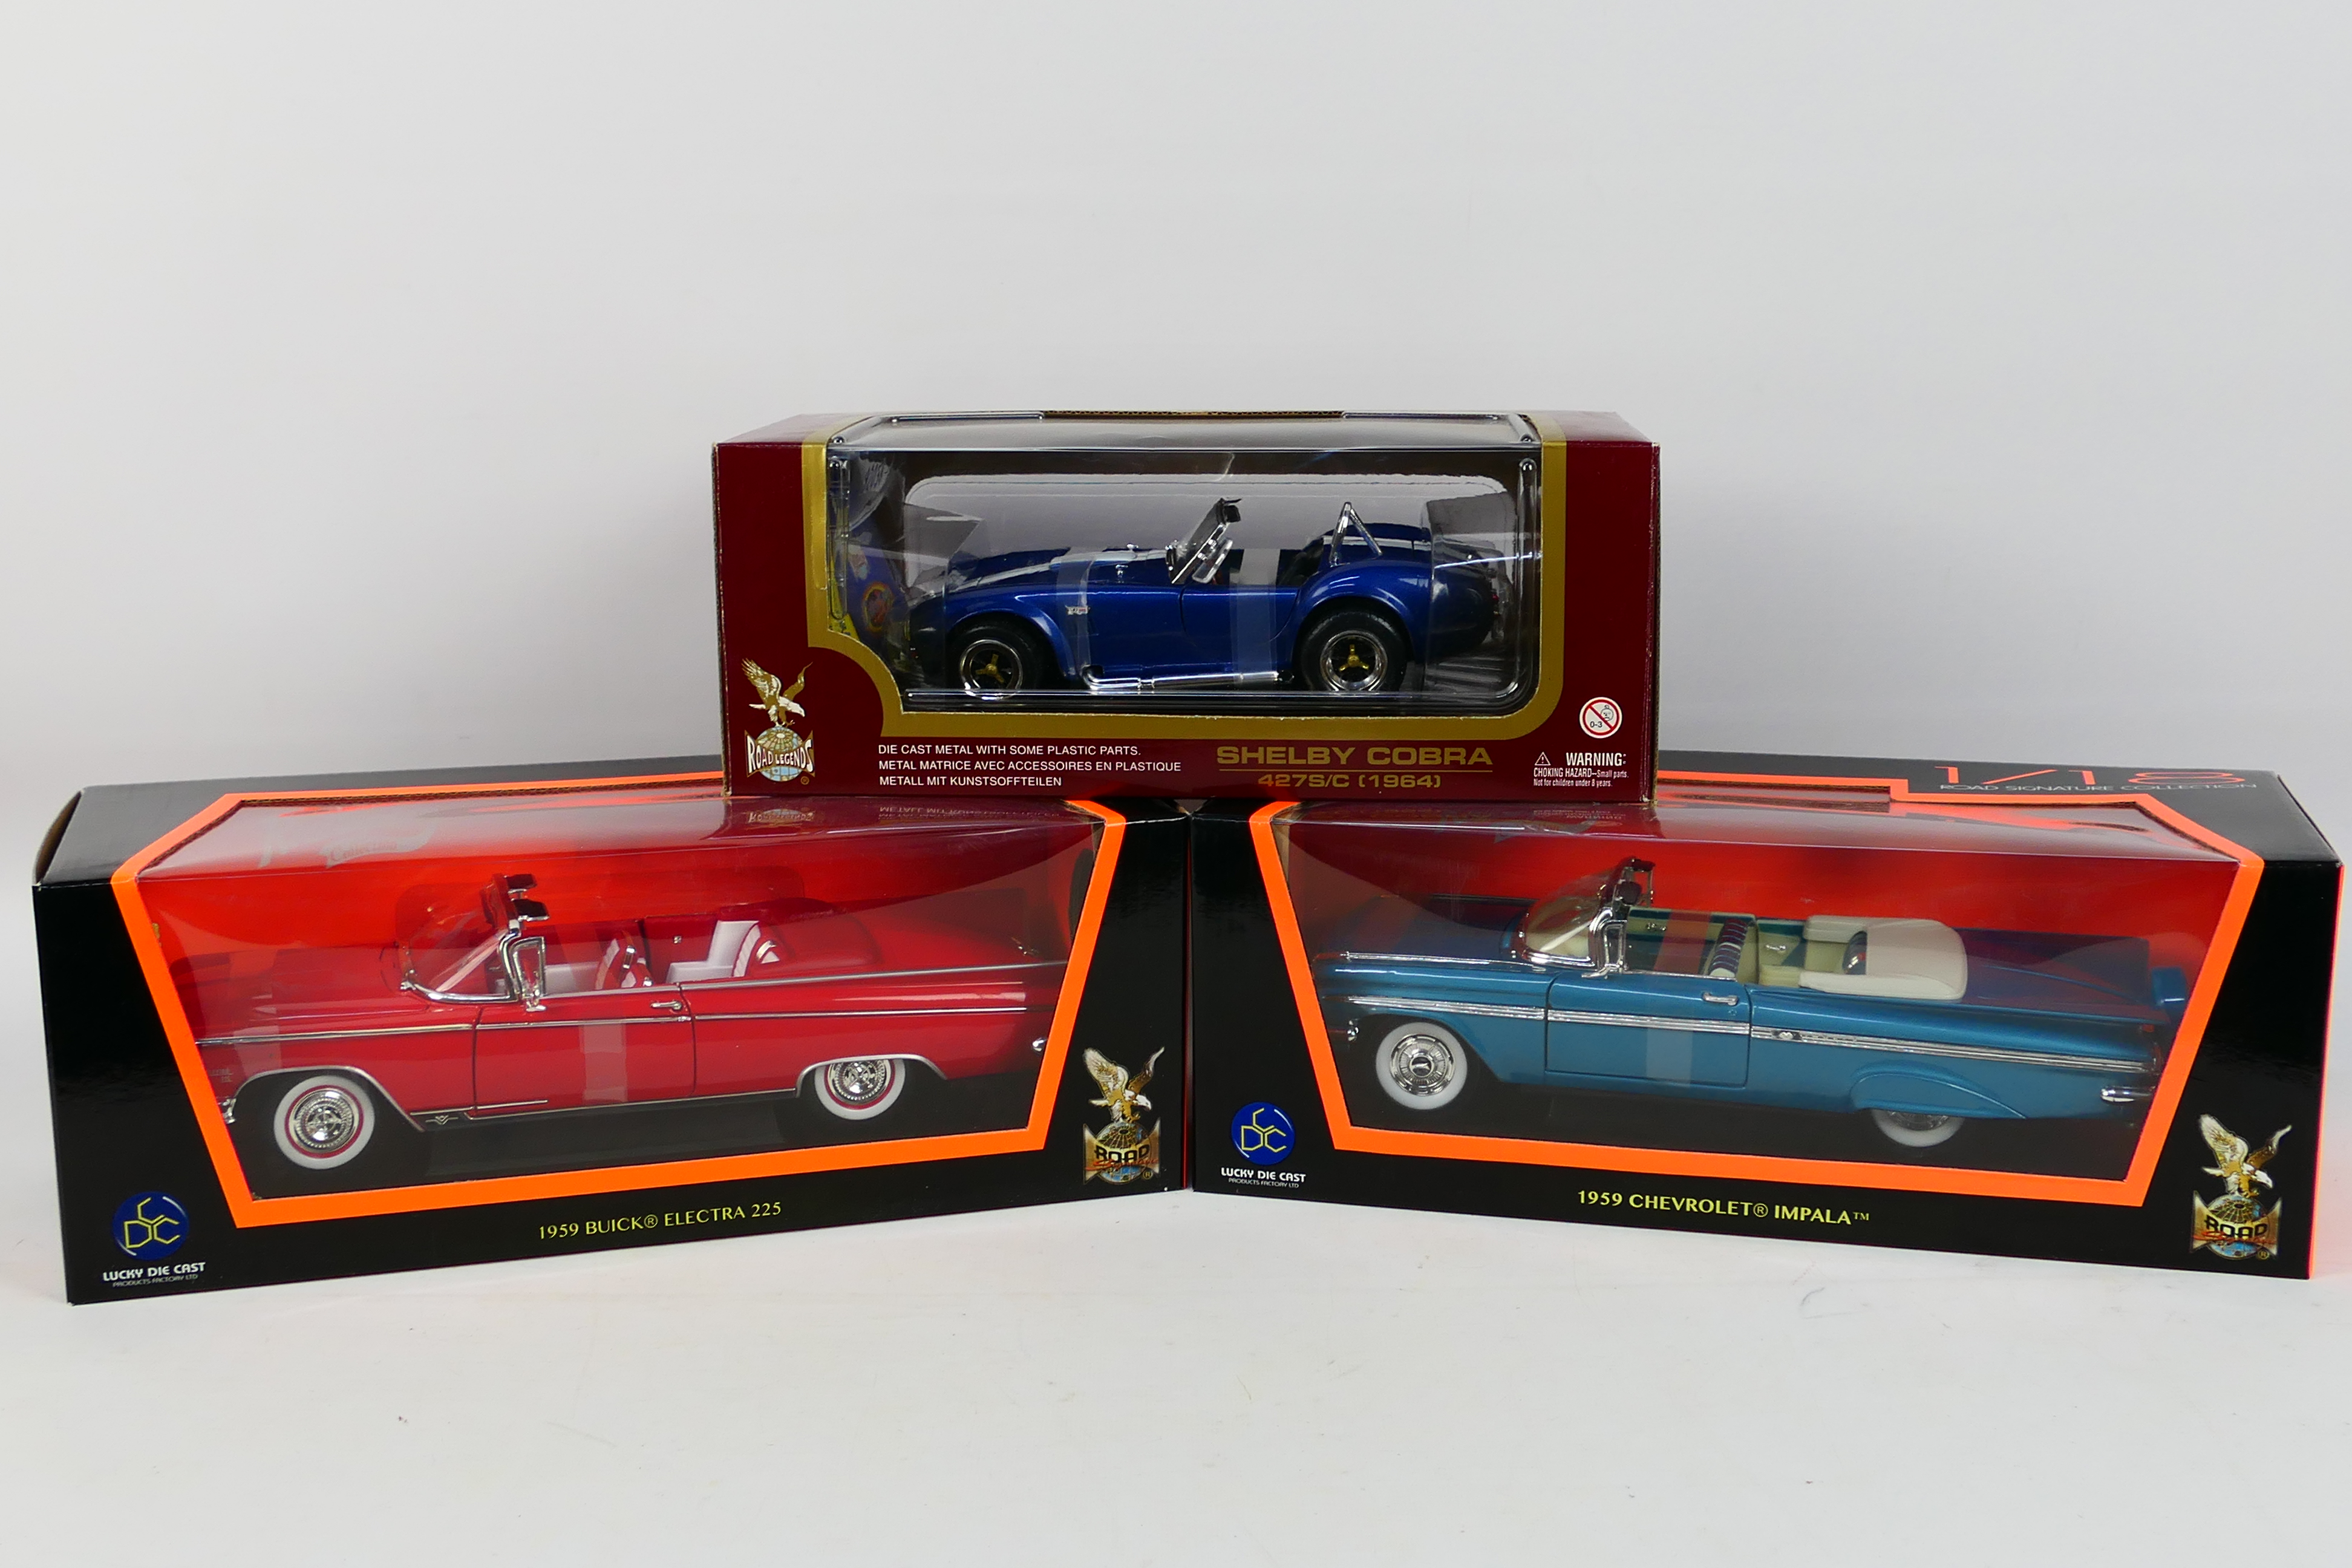 Road Signatures - Three boxed diecast 1:18 scale model cars from Road Signatures.